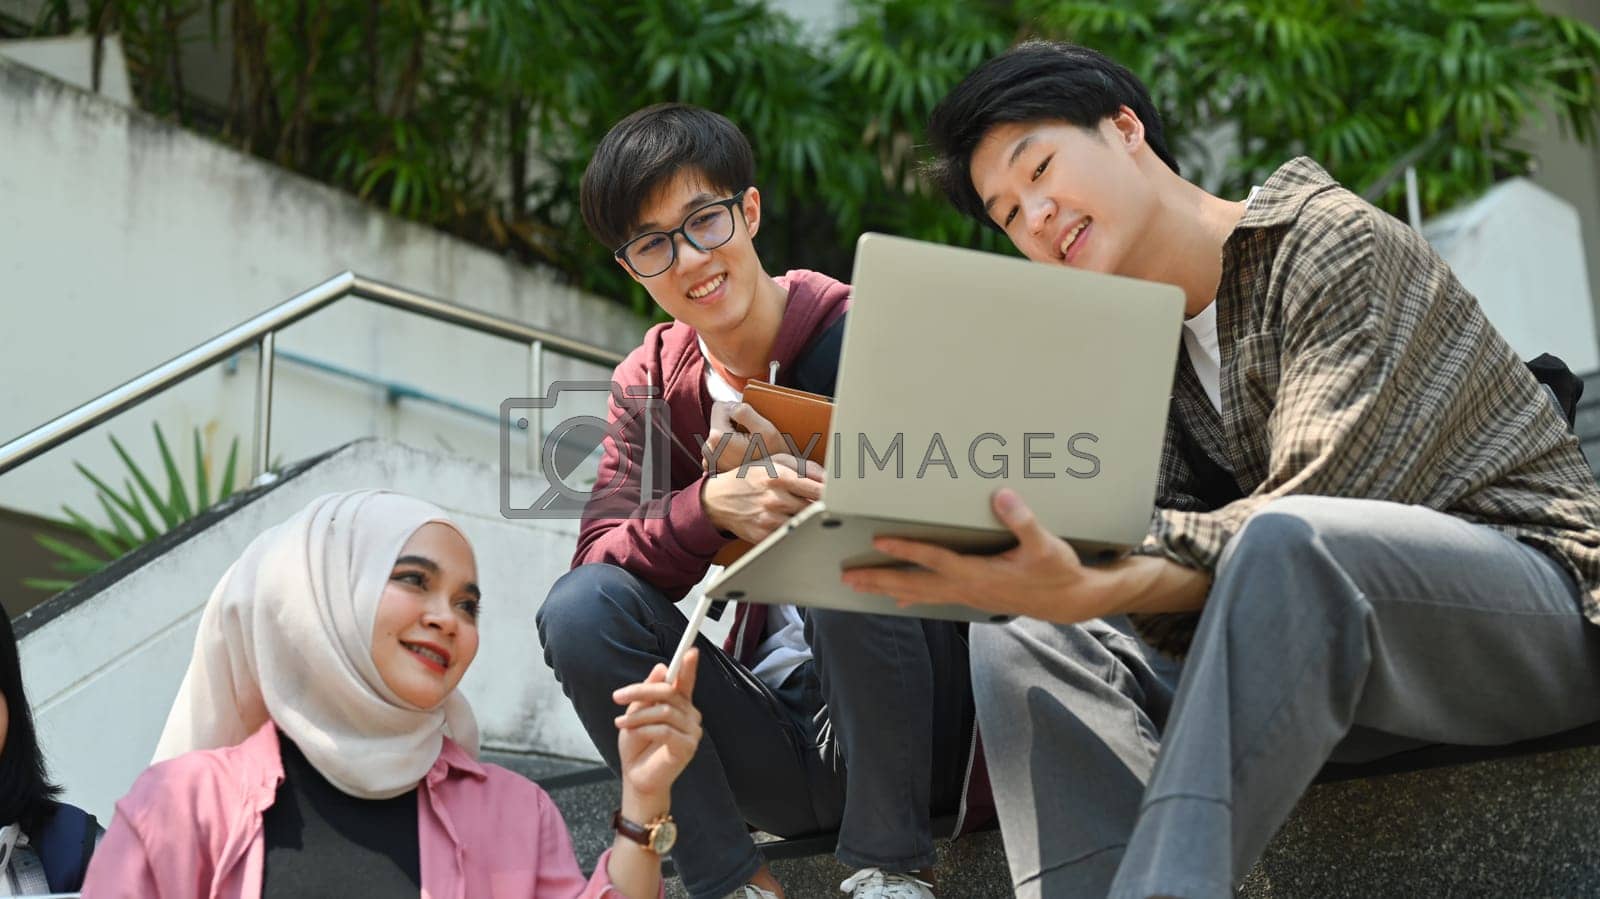 Royalty free image of Group of students are working on academic project or preparing for exam together. Education, Learning and technology concept by prathanchorruangsak